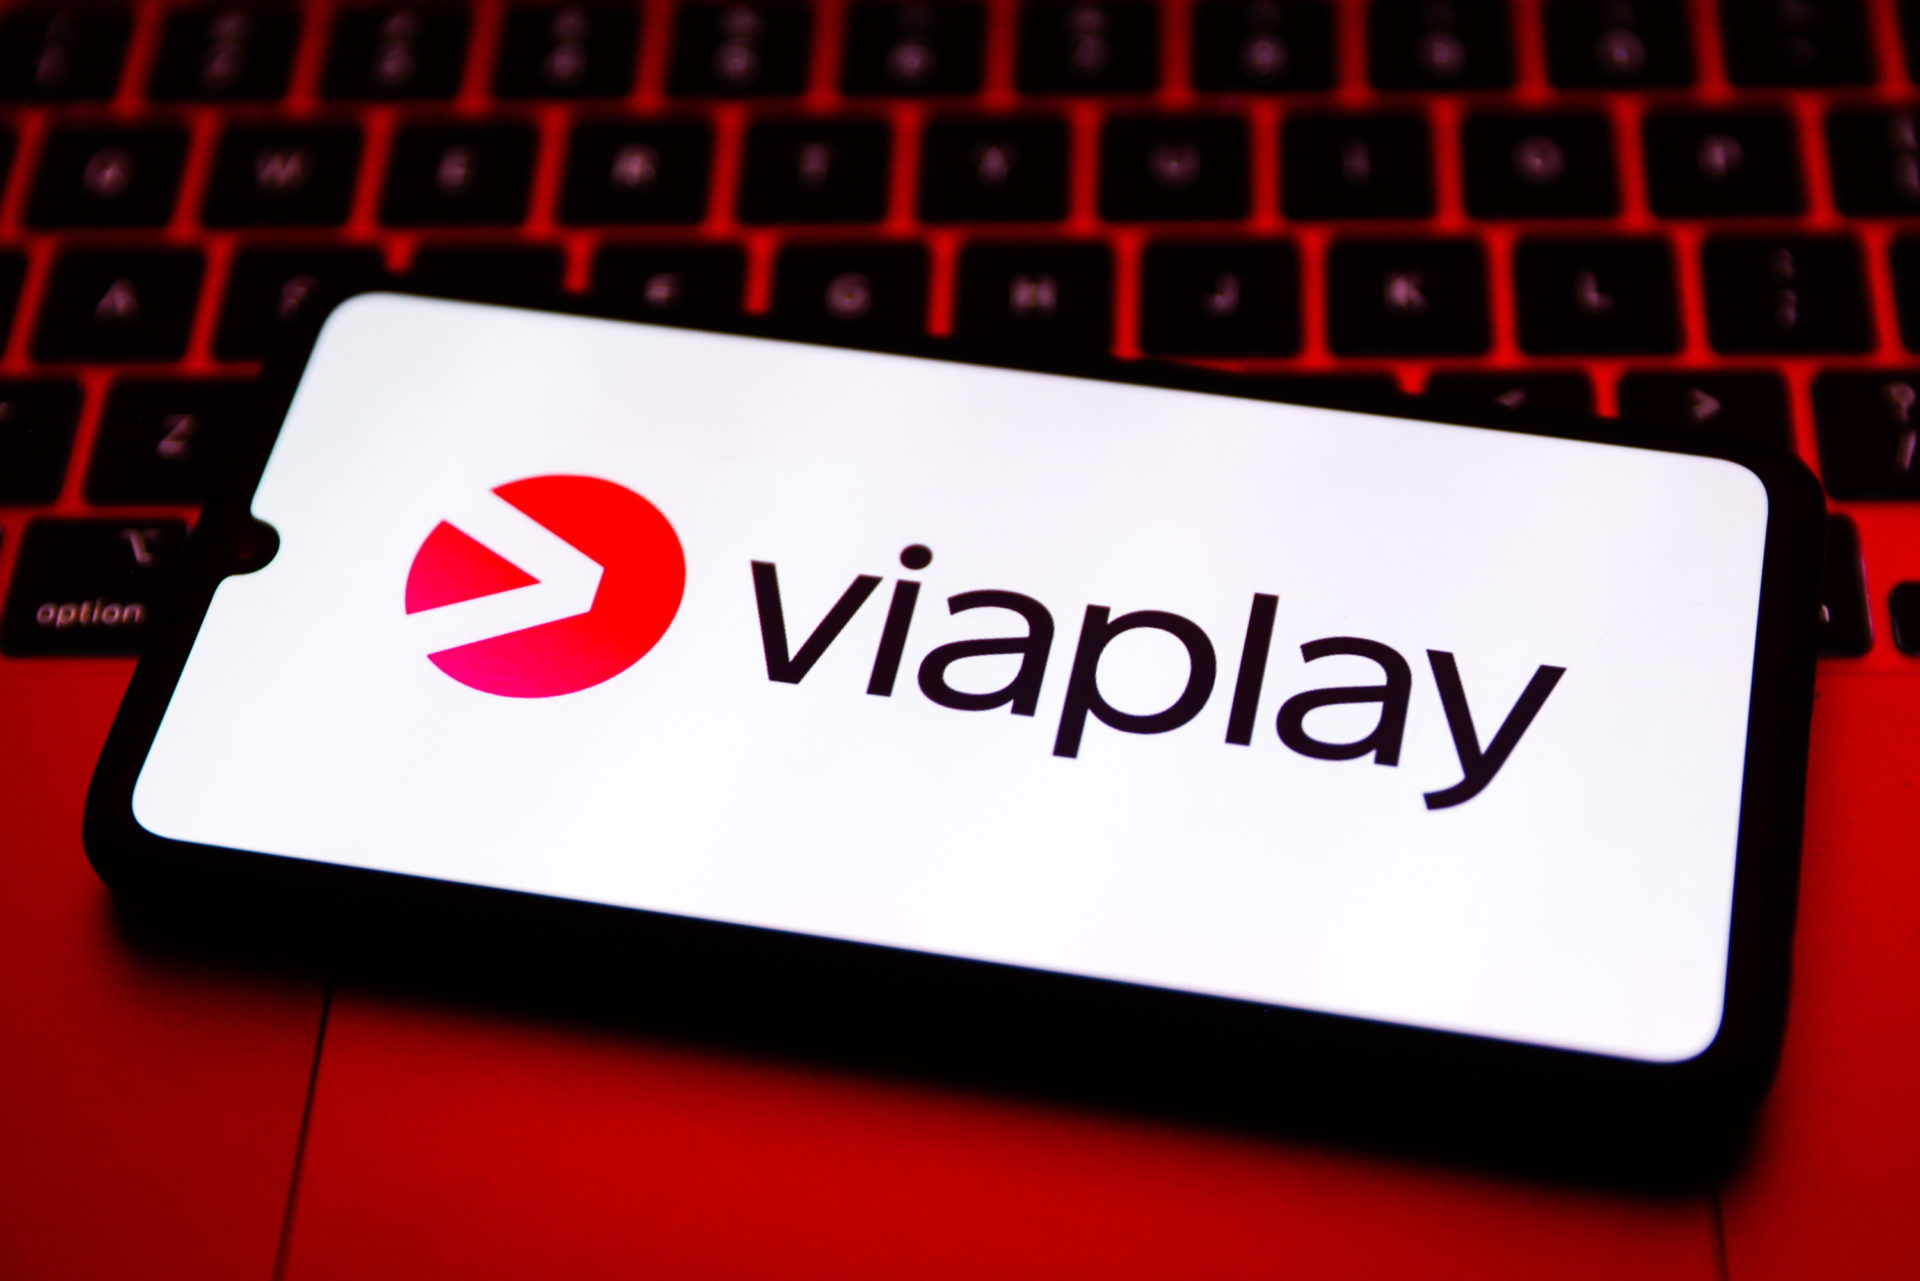 Viaplay are likely to be the match broadcasters